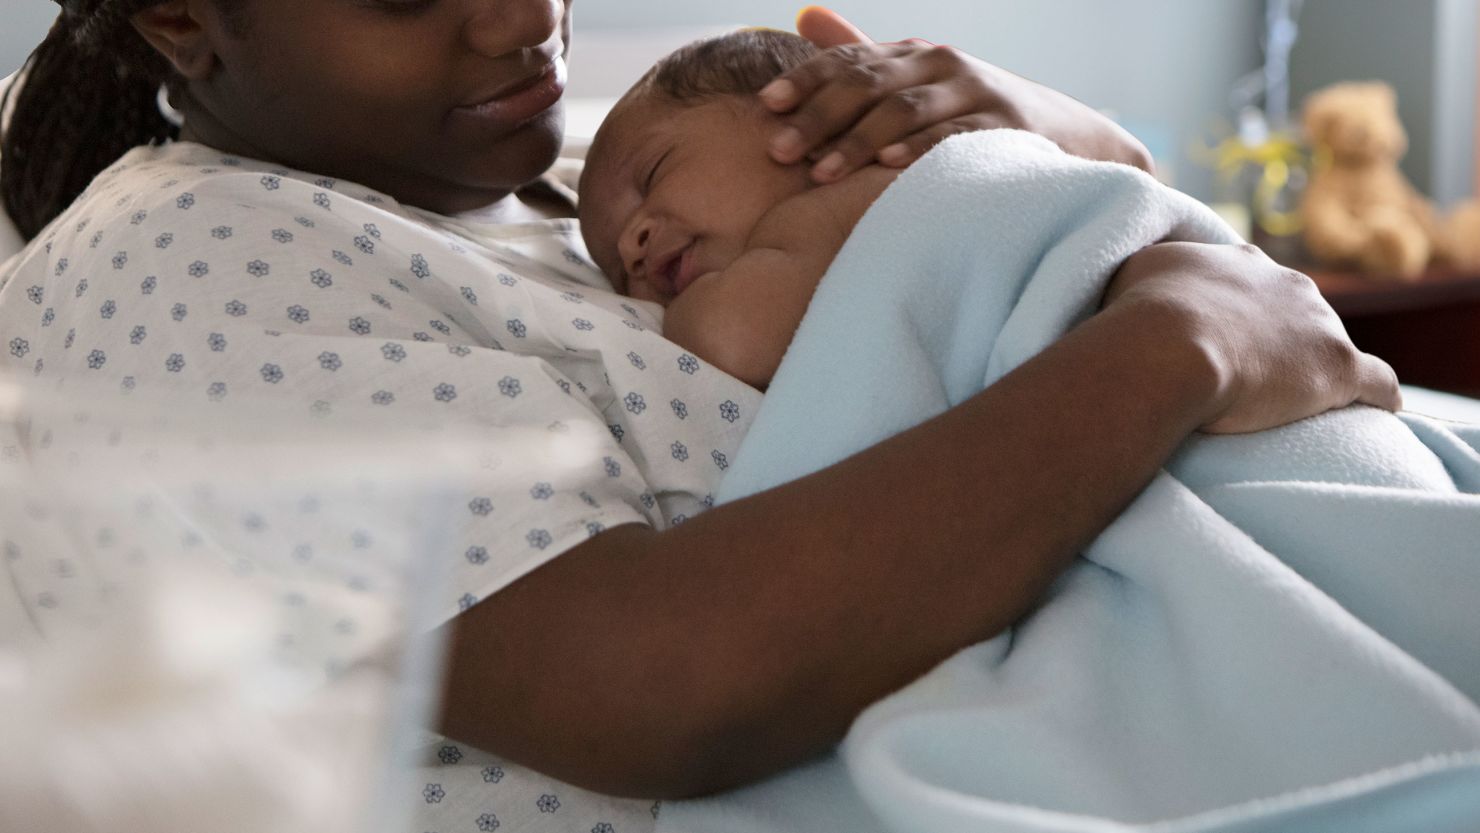 A new study by the University of Colorado Boulder suggests systemic racism may be shaping obstetric care in the United States.  